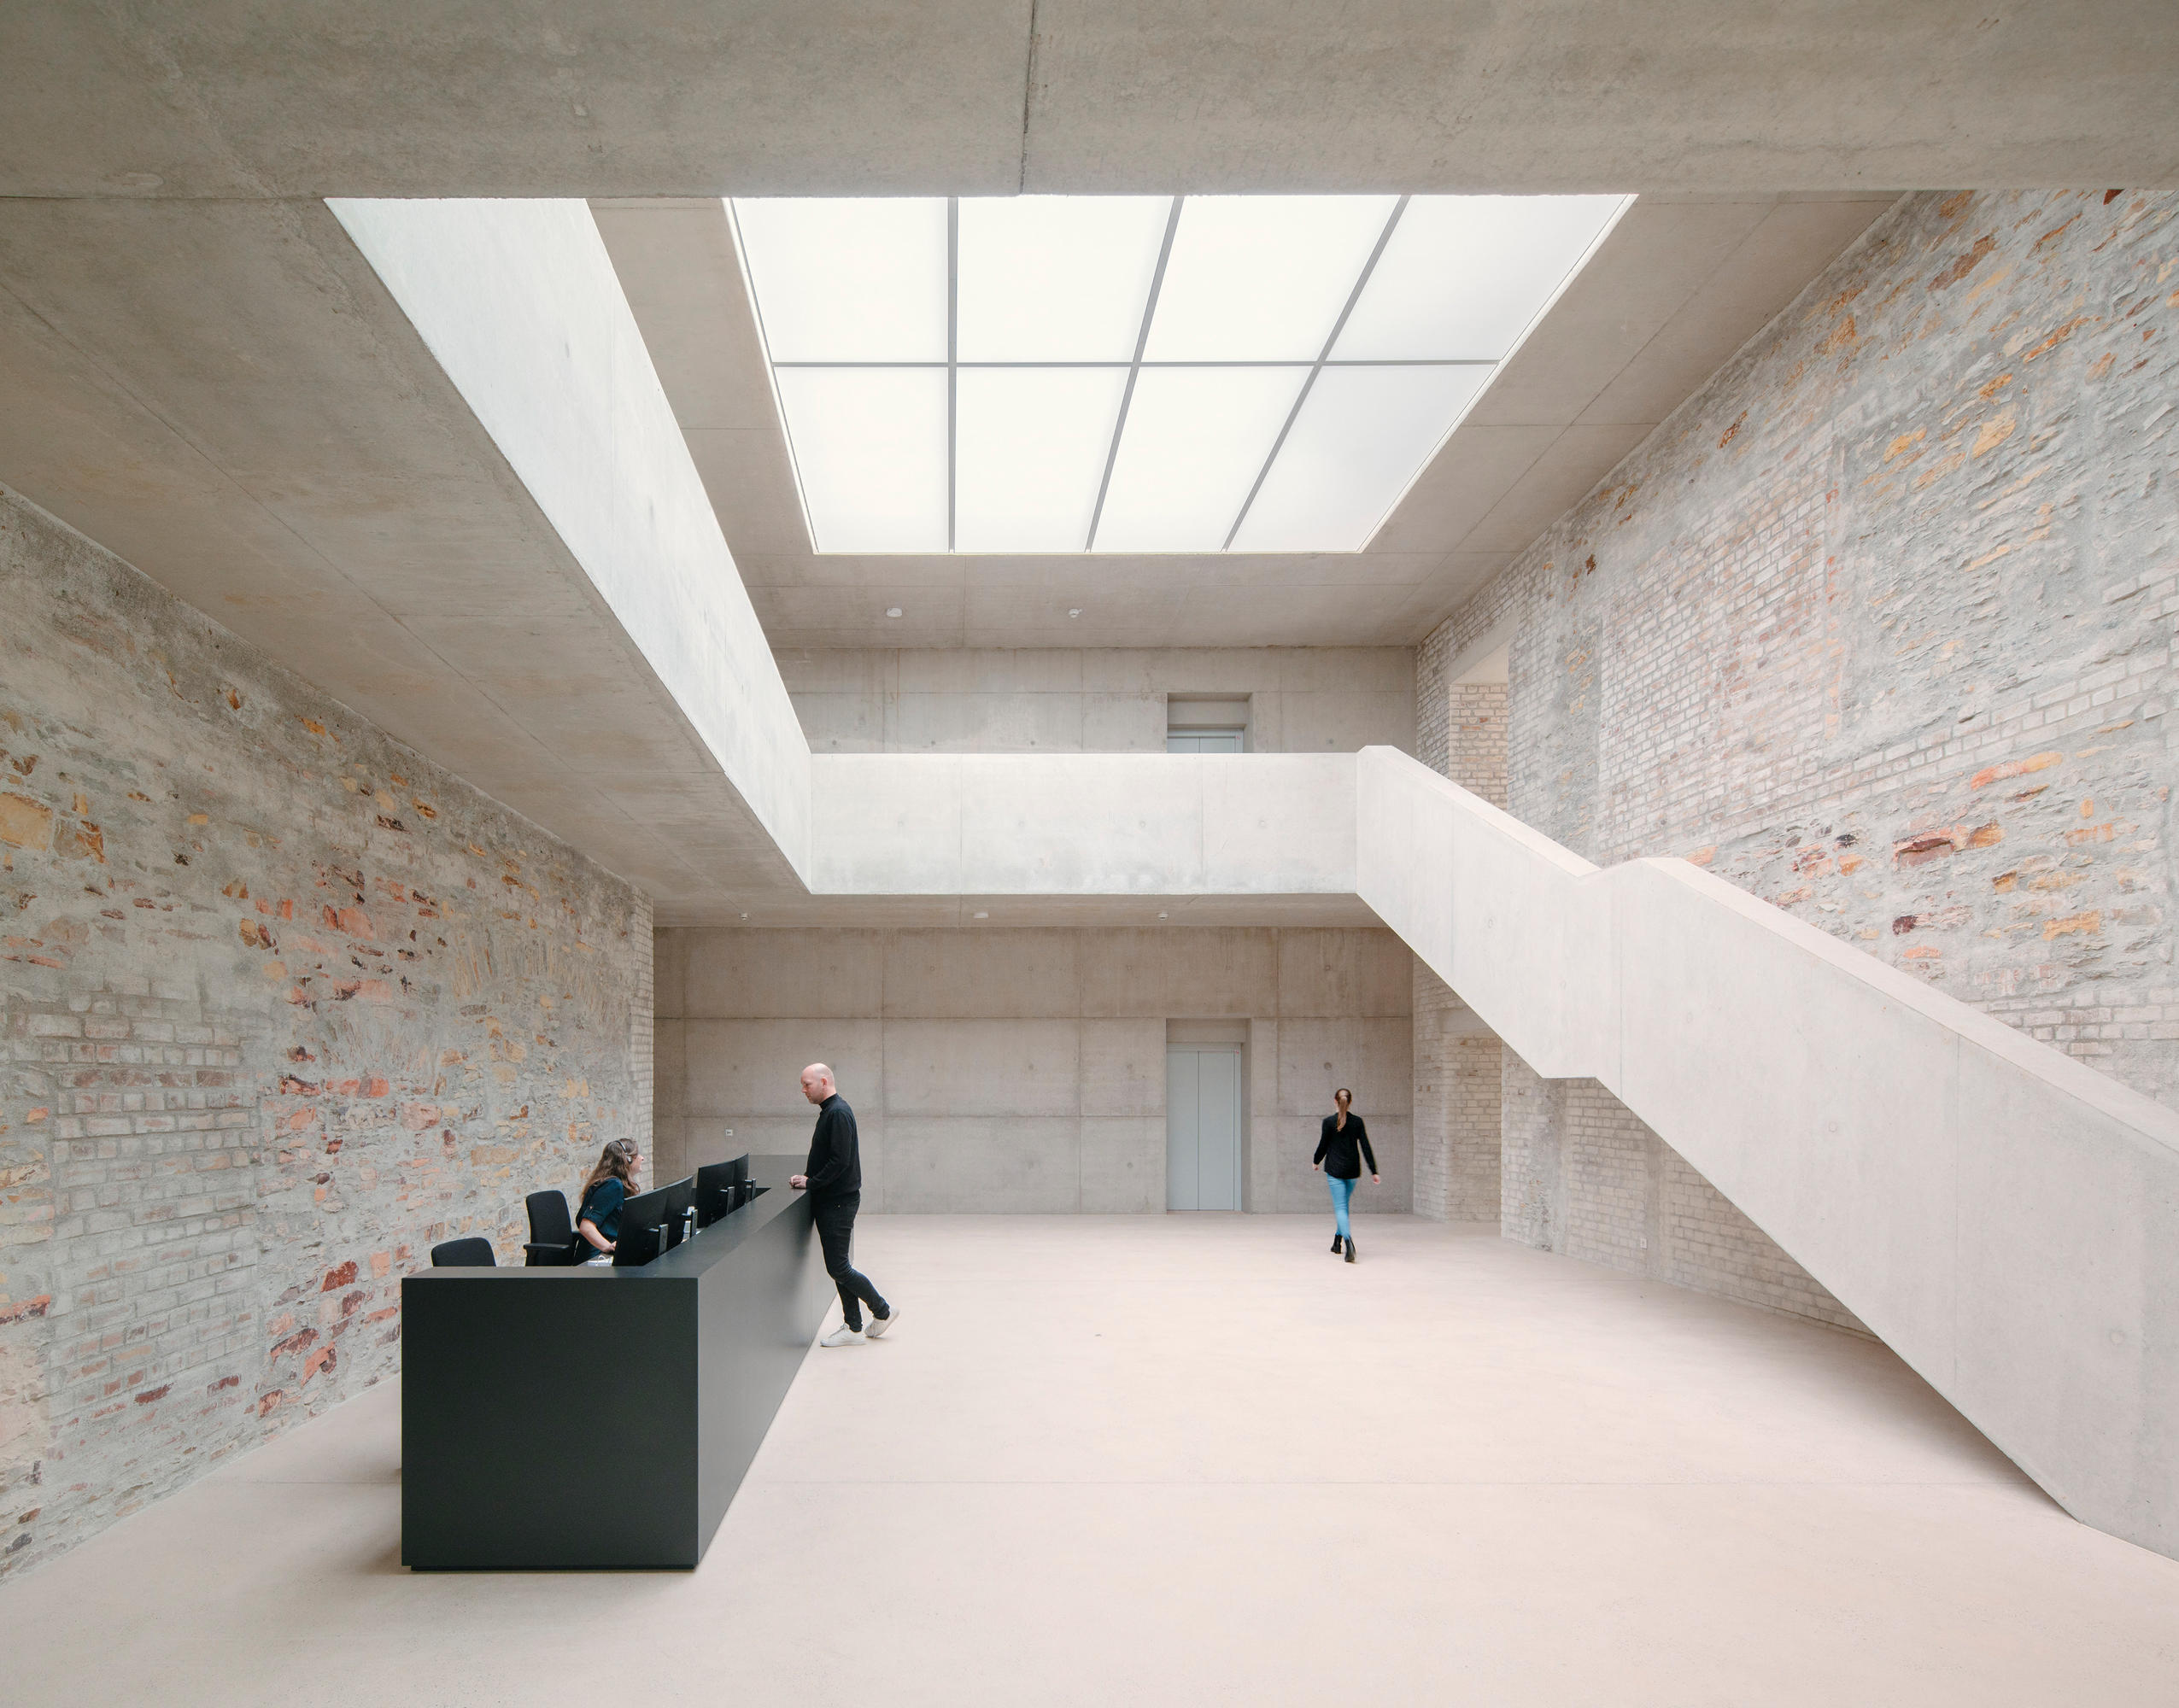 Jacoby Studios Headquarters by David Chipperfield Architects